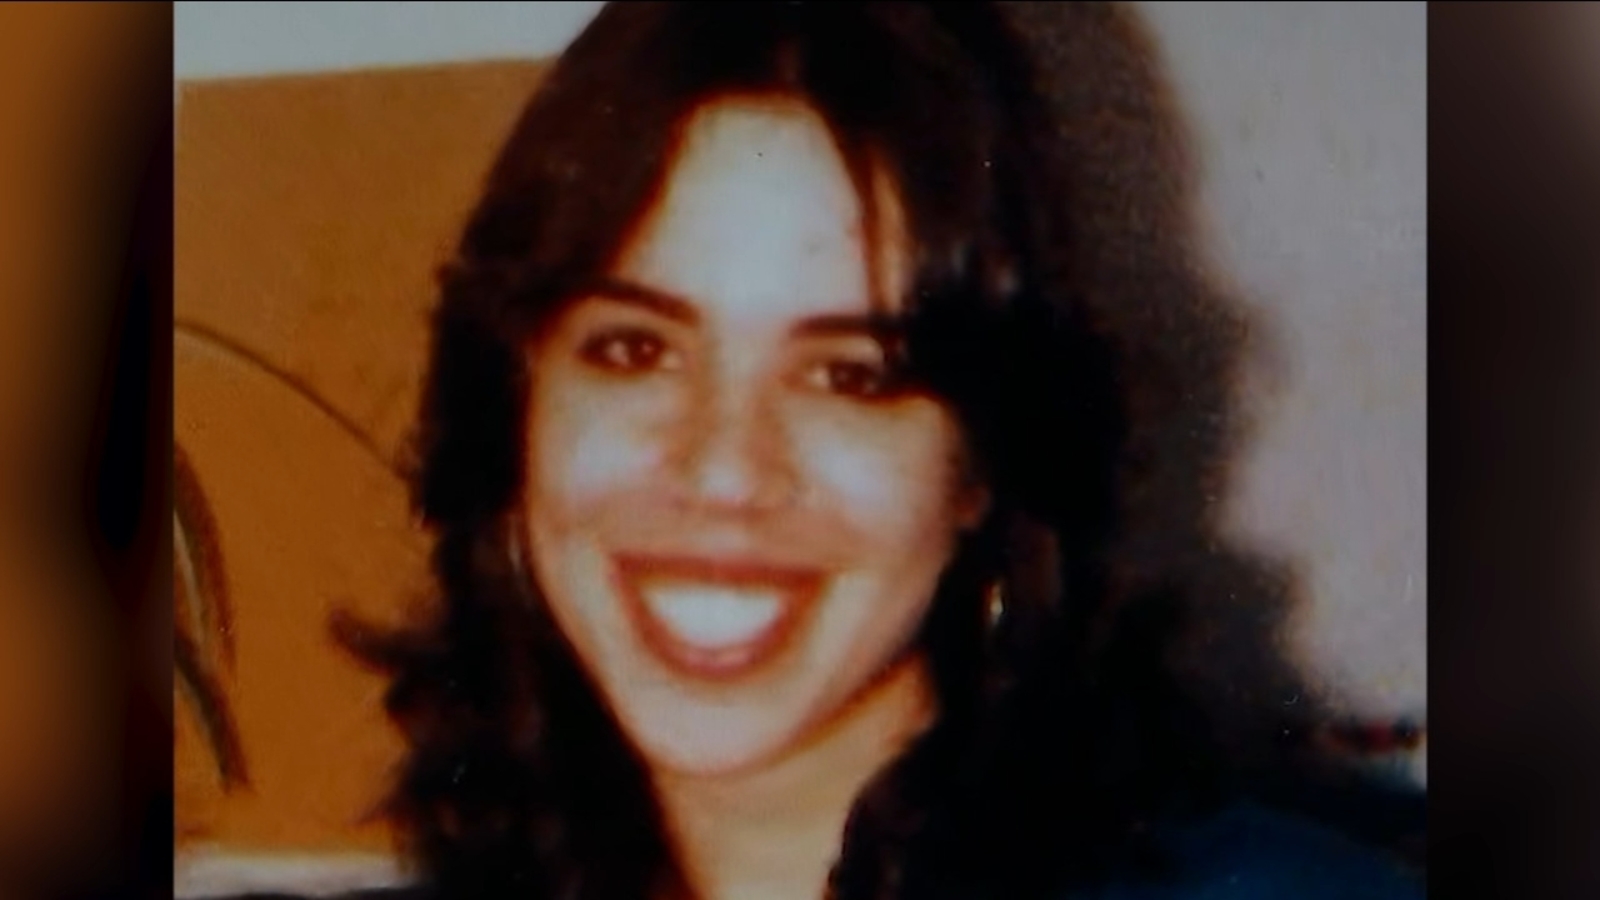 Cold case solved: DNA match helps police identify attacker who killed Eve Wilkowitz in 1980